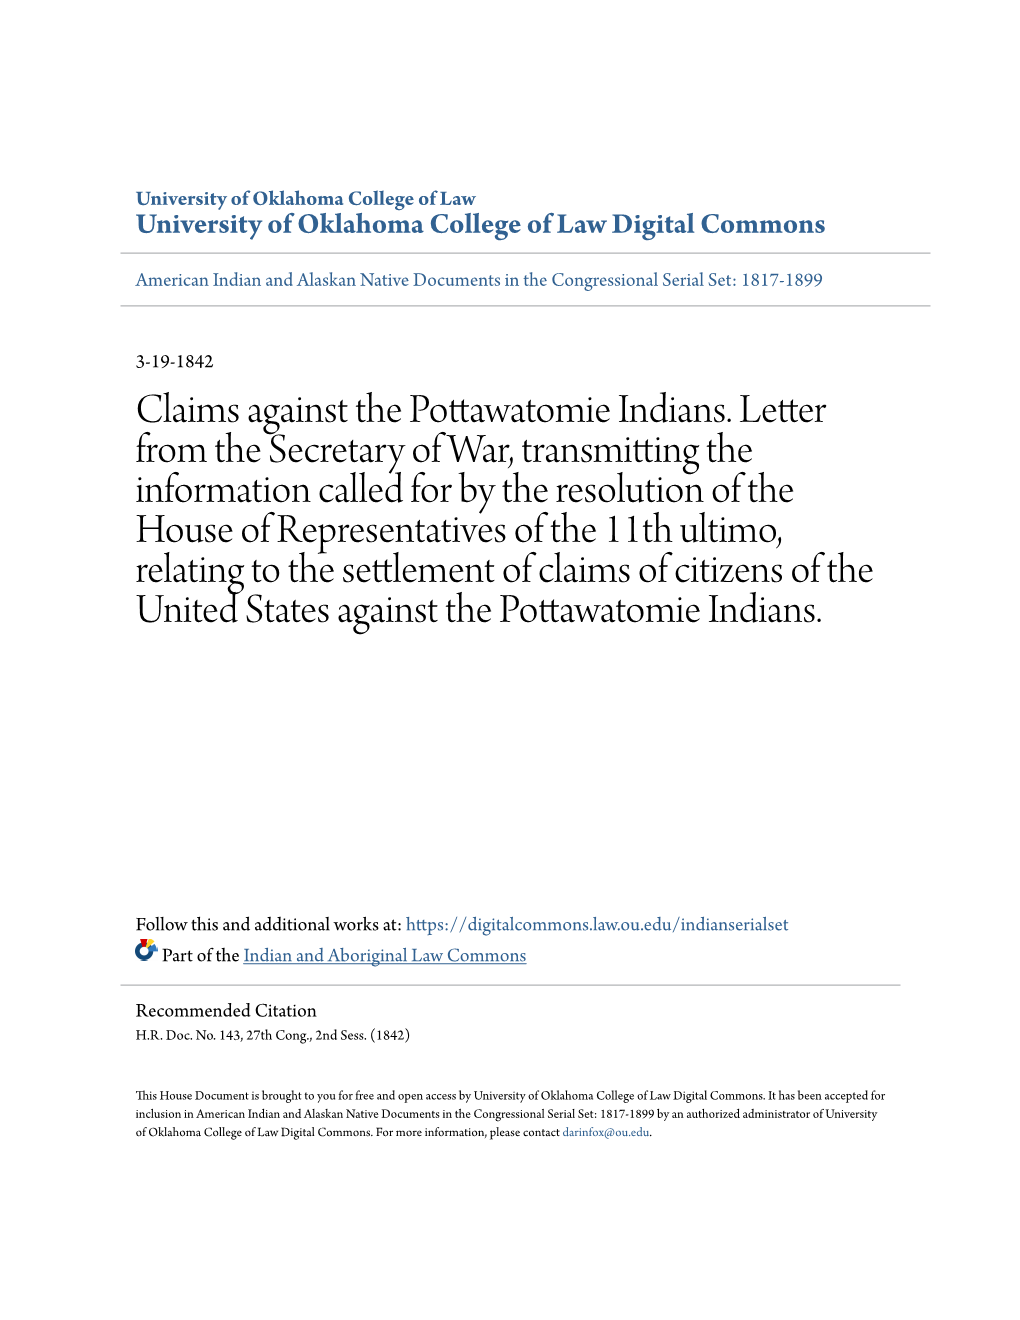 Claims Against the Pottawatomie Indians. Letter from the Secretary of War, Transmitting the Information Called for by the Resolu